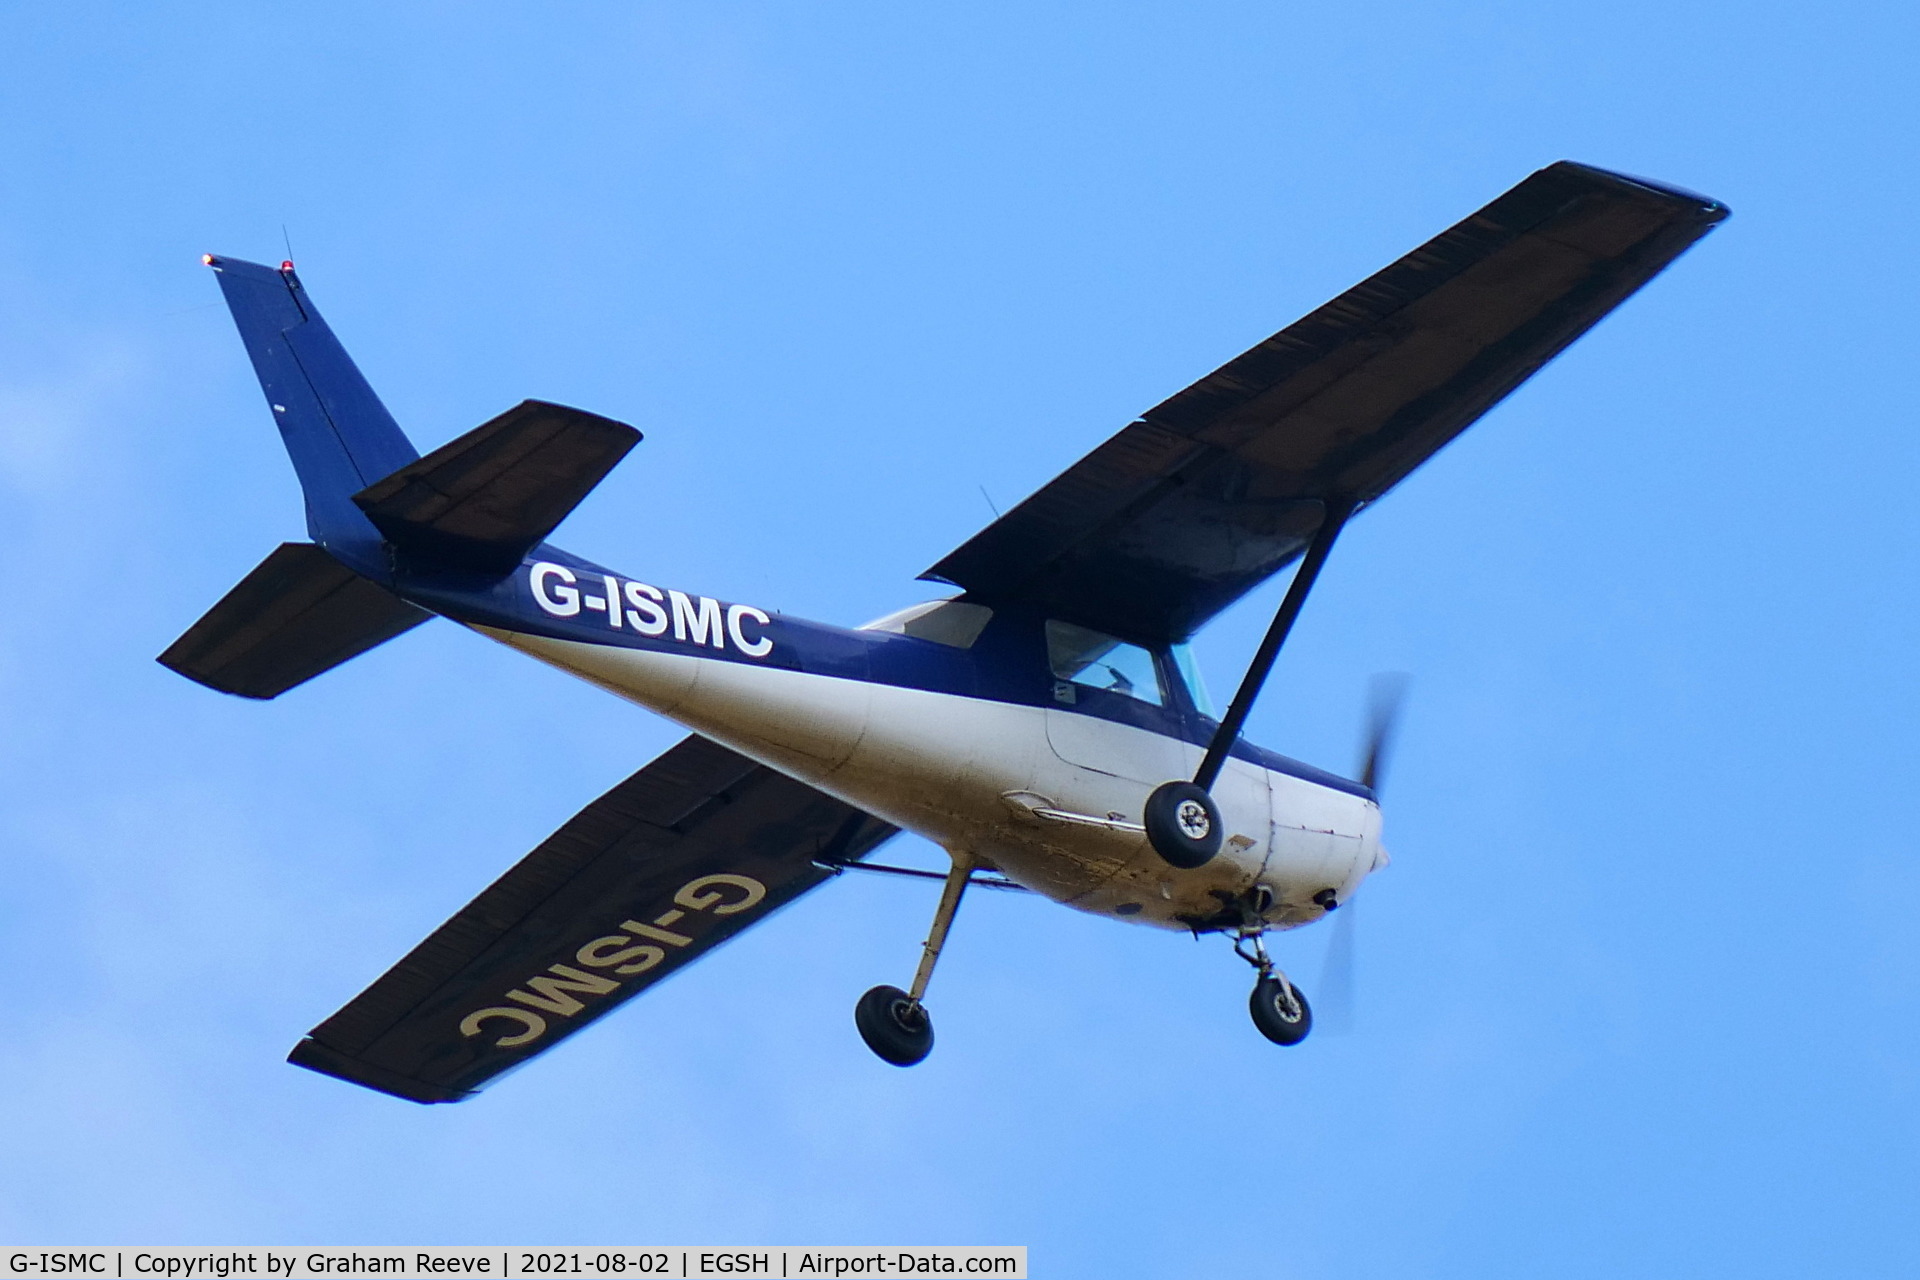 G-ISMC, 1978 Reims F152 C/N 15201468, Departing from Norwich.